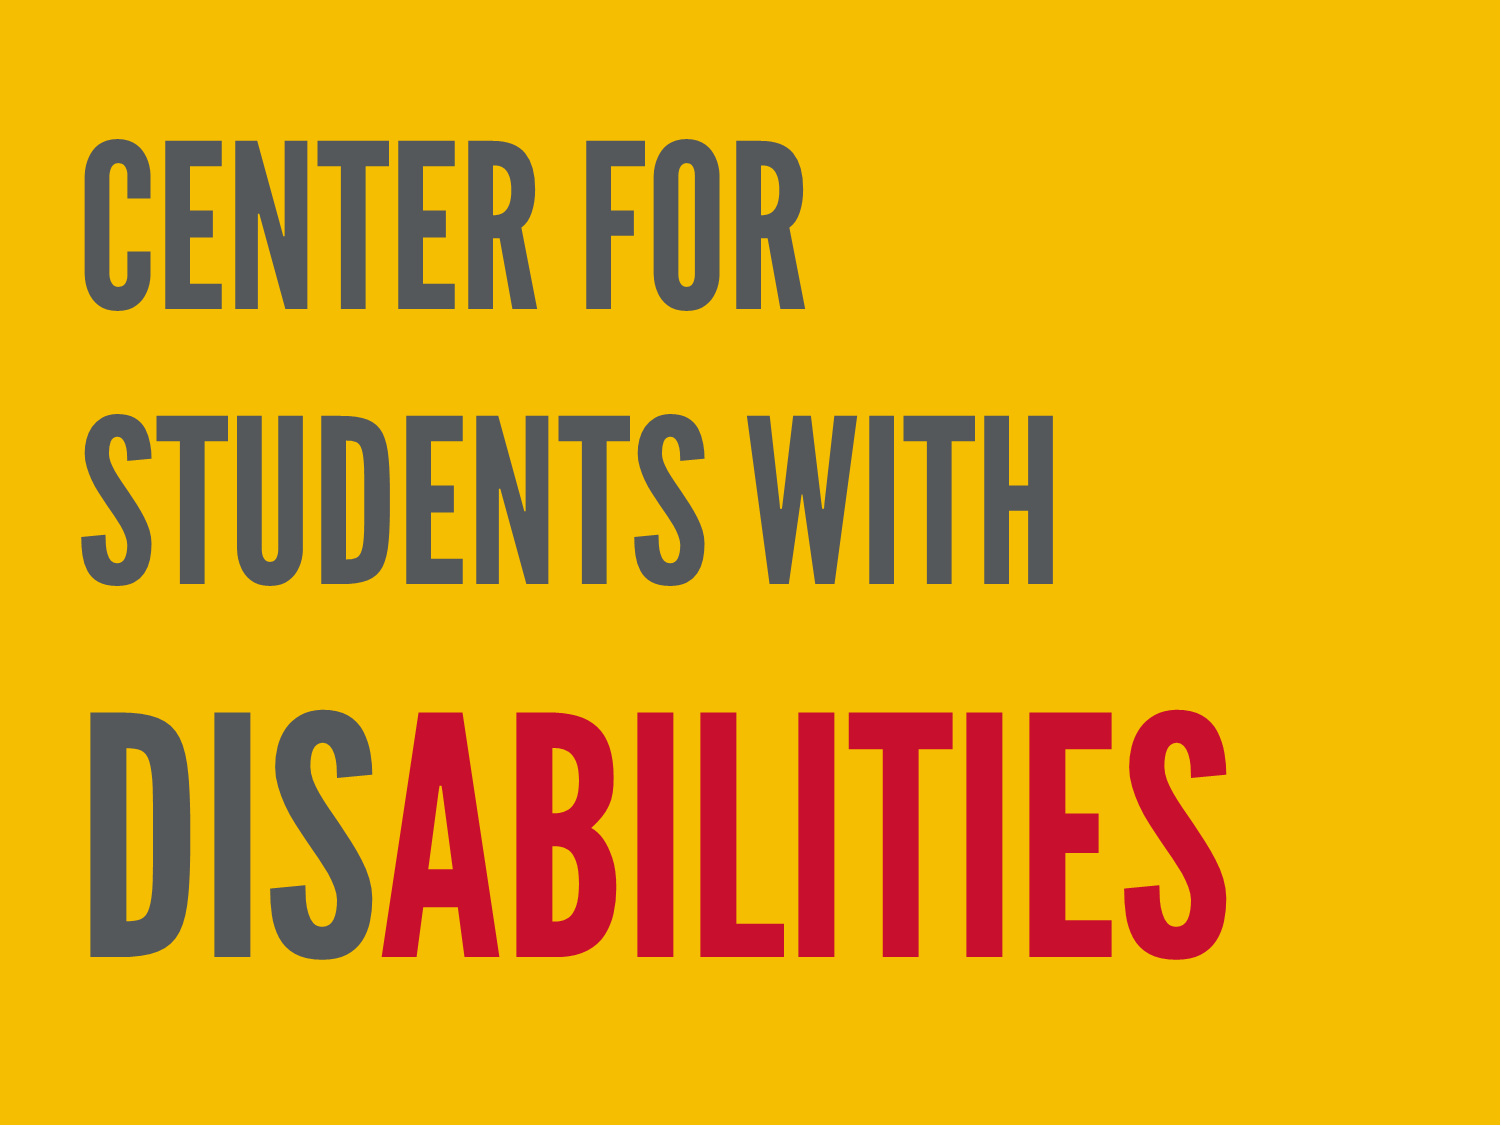 Center for Students with DisABILITIES